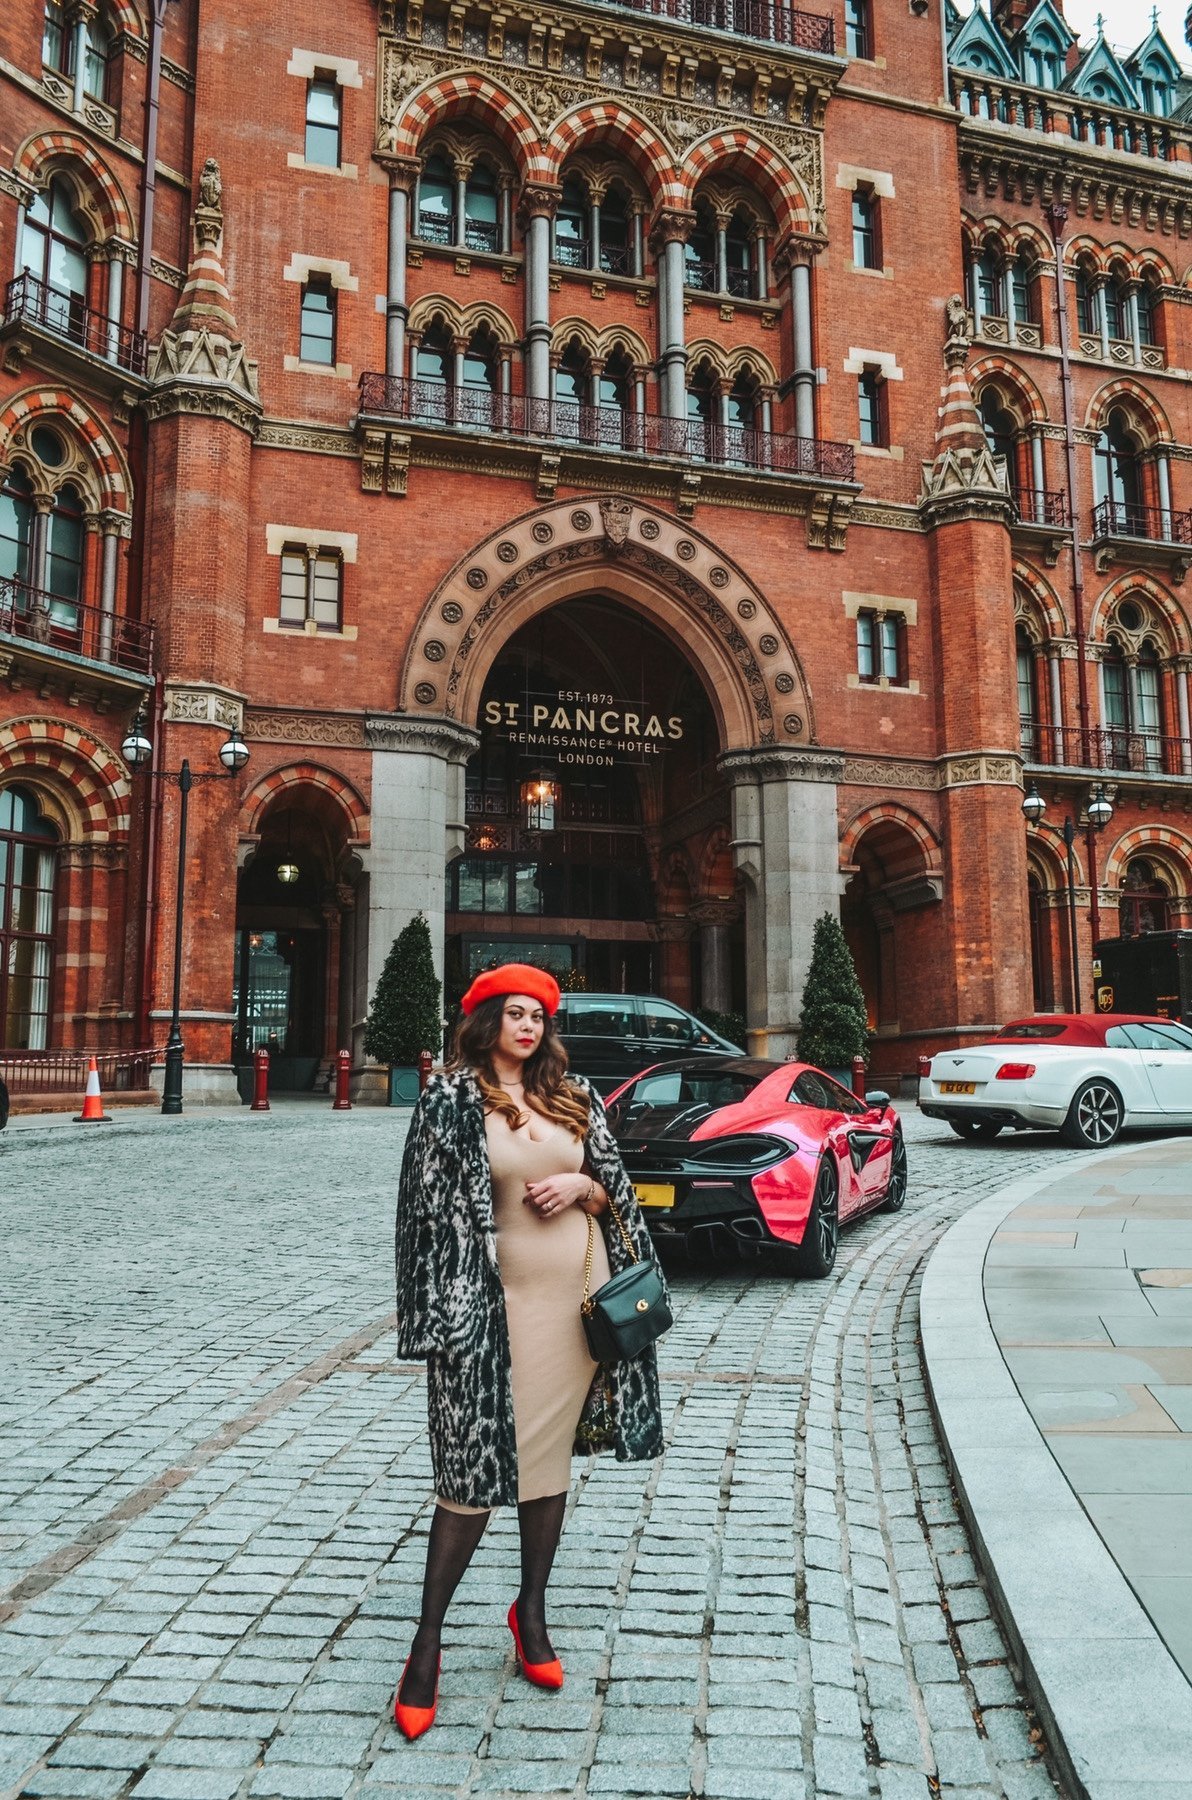 ST. PANCRAS RENAISSANCE HOTEL LONDON
Woman with red Ferrari in fur coat and parisian style outfit . Knit dress and Red beret. Instagrammable spot in london St Pancras  London.